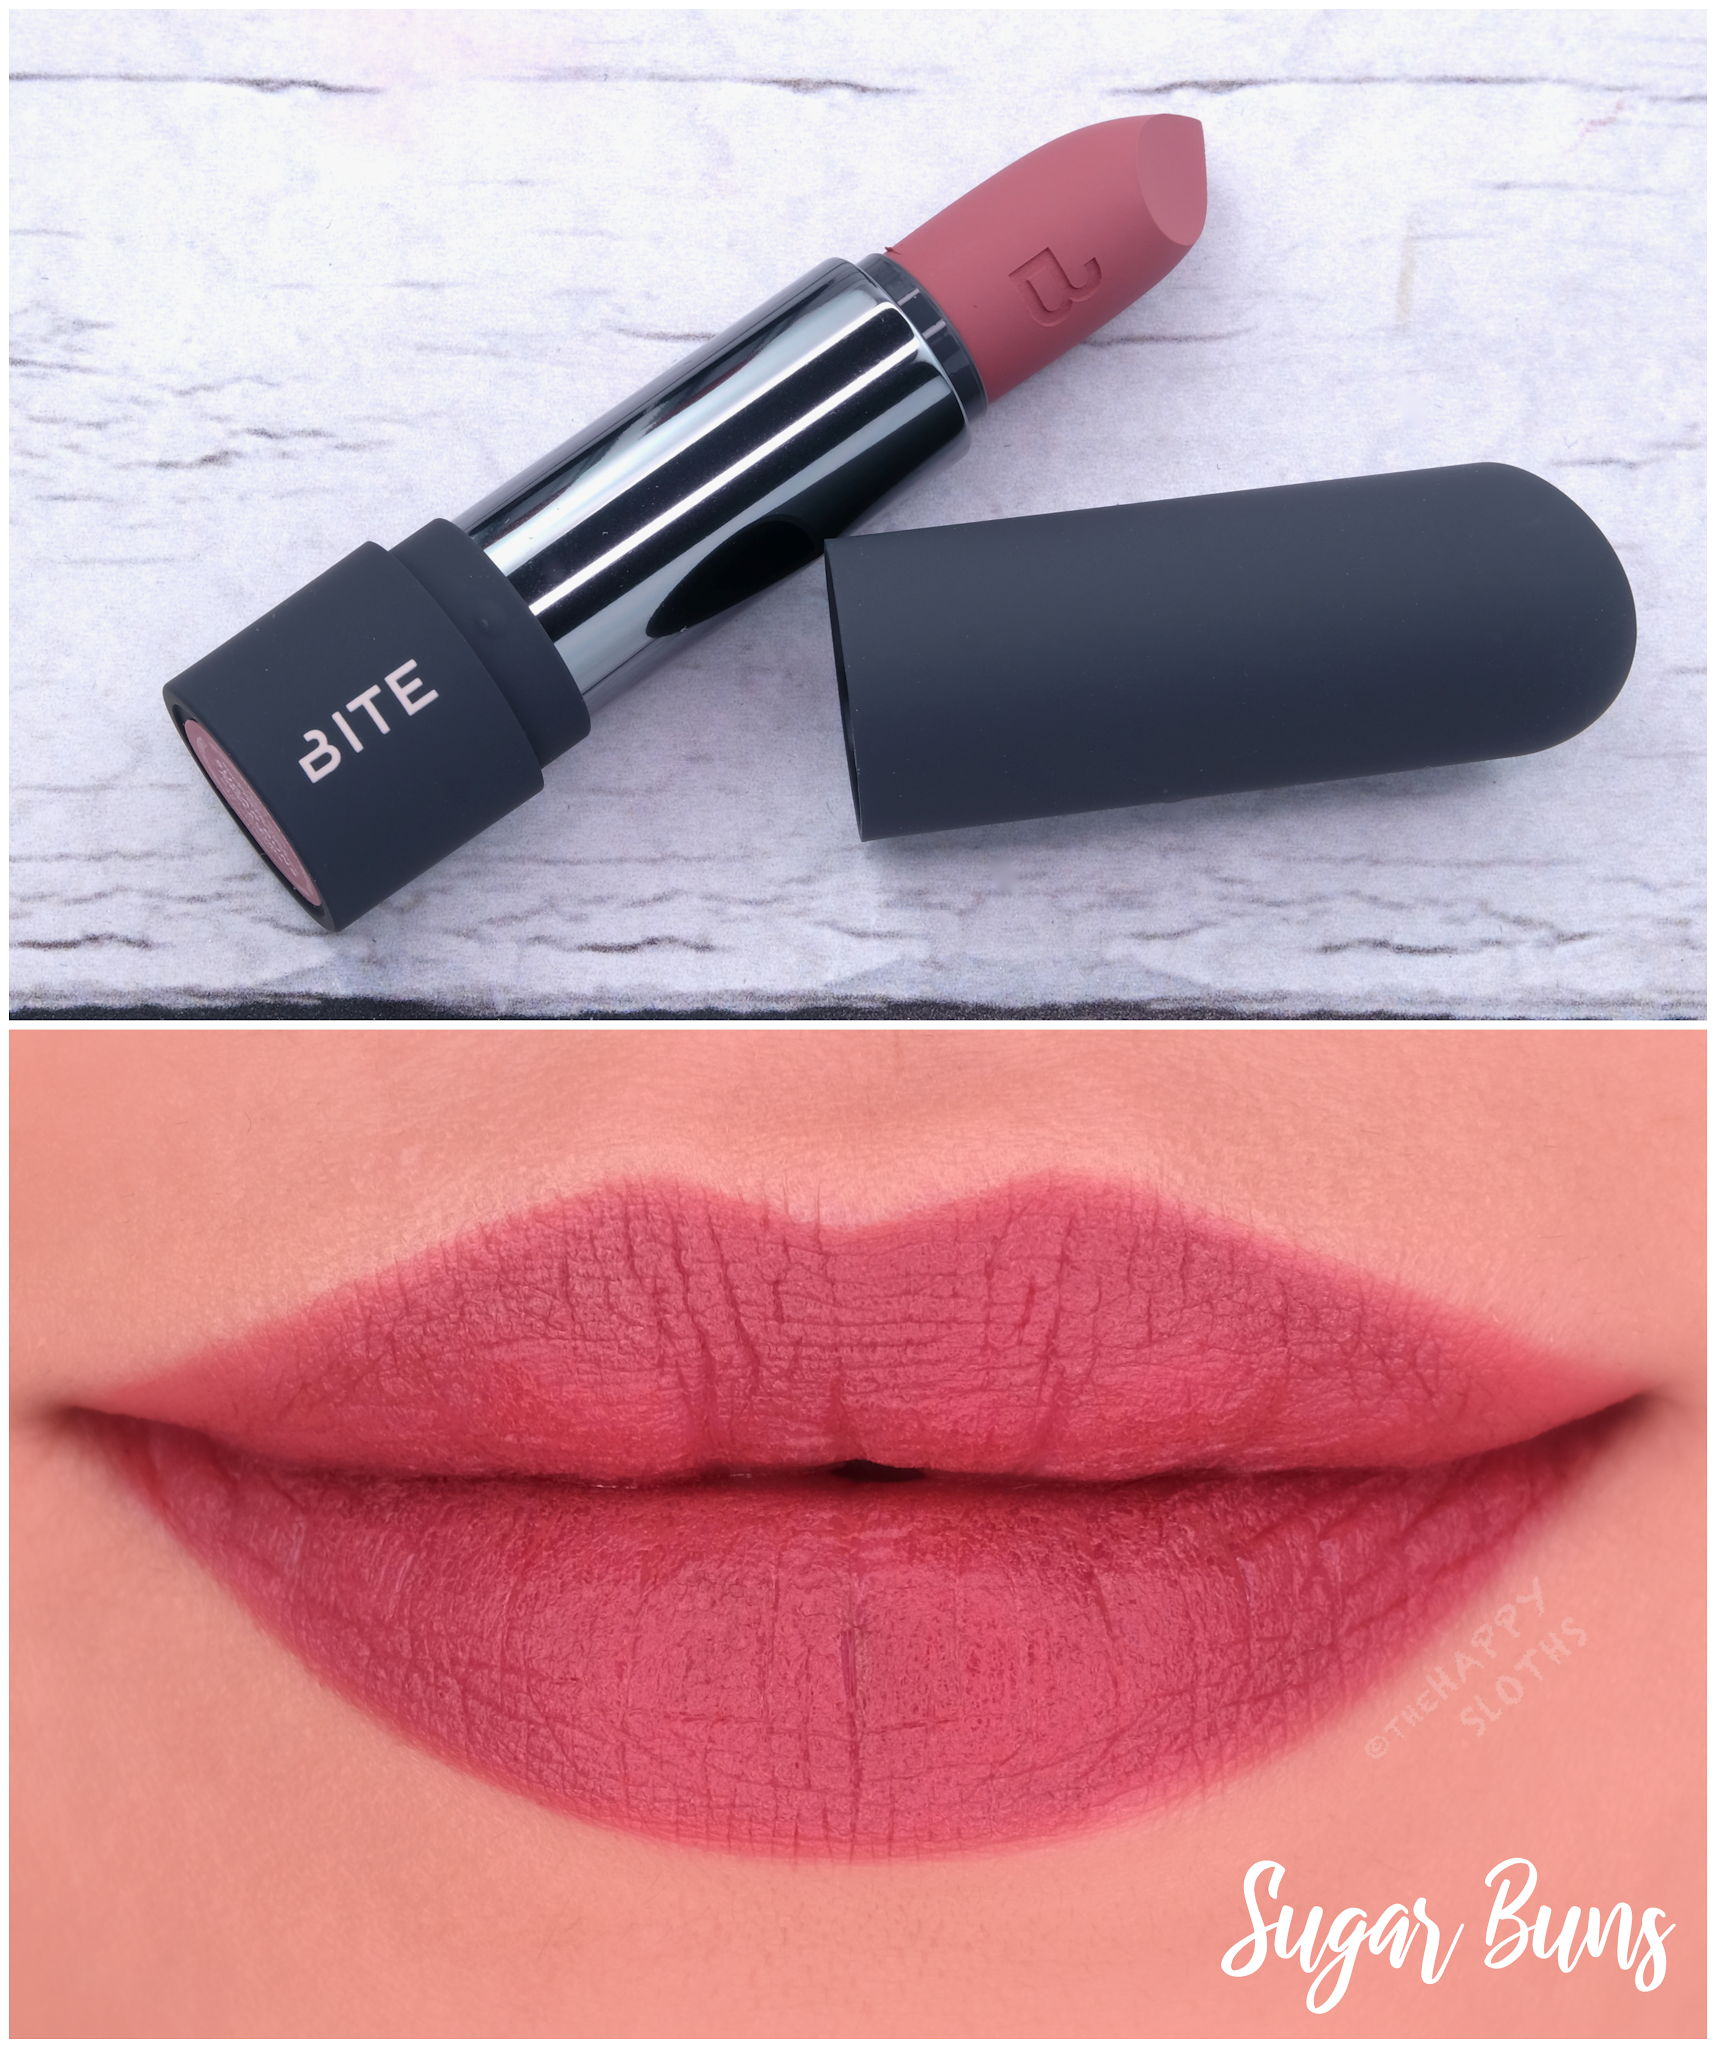 Bite Beauty | Power Move Soft Matte Lipstick in "Sugar Buns": Review and Swatches